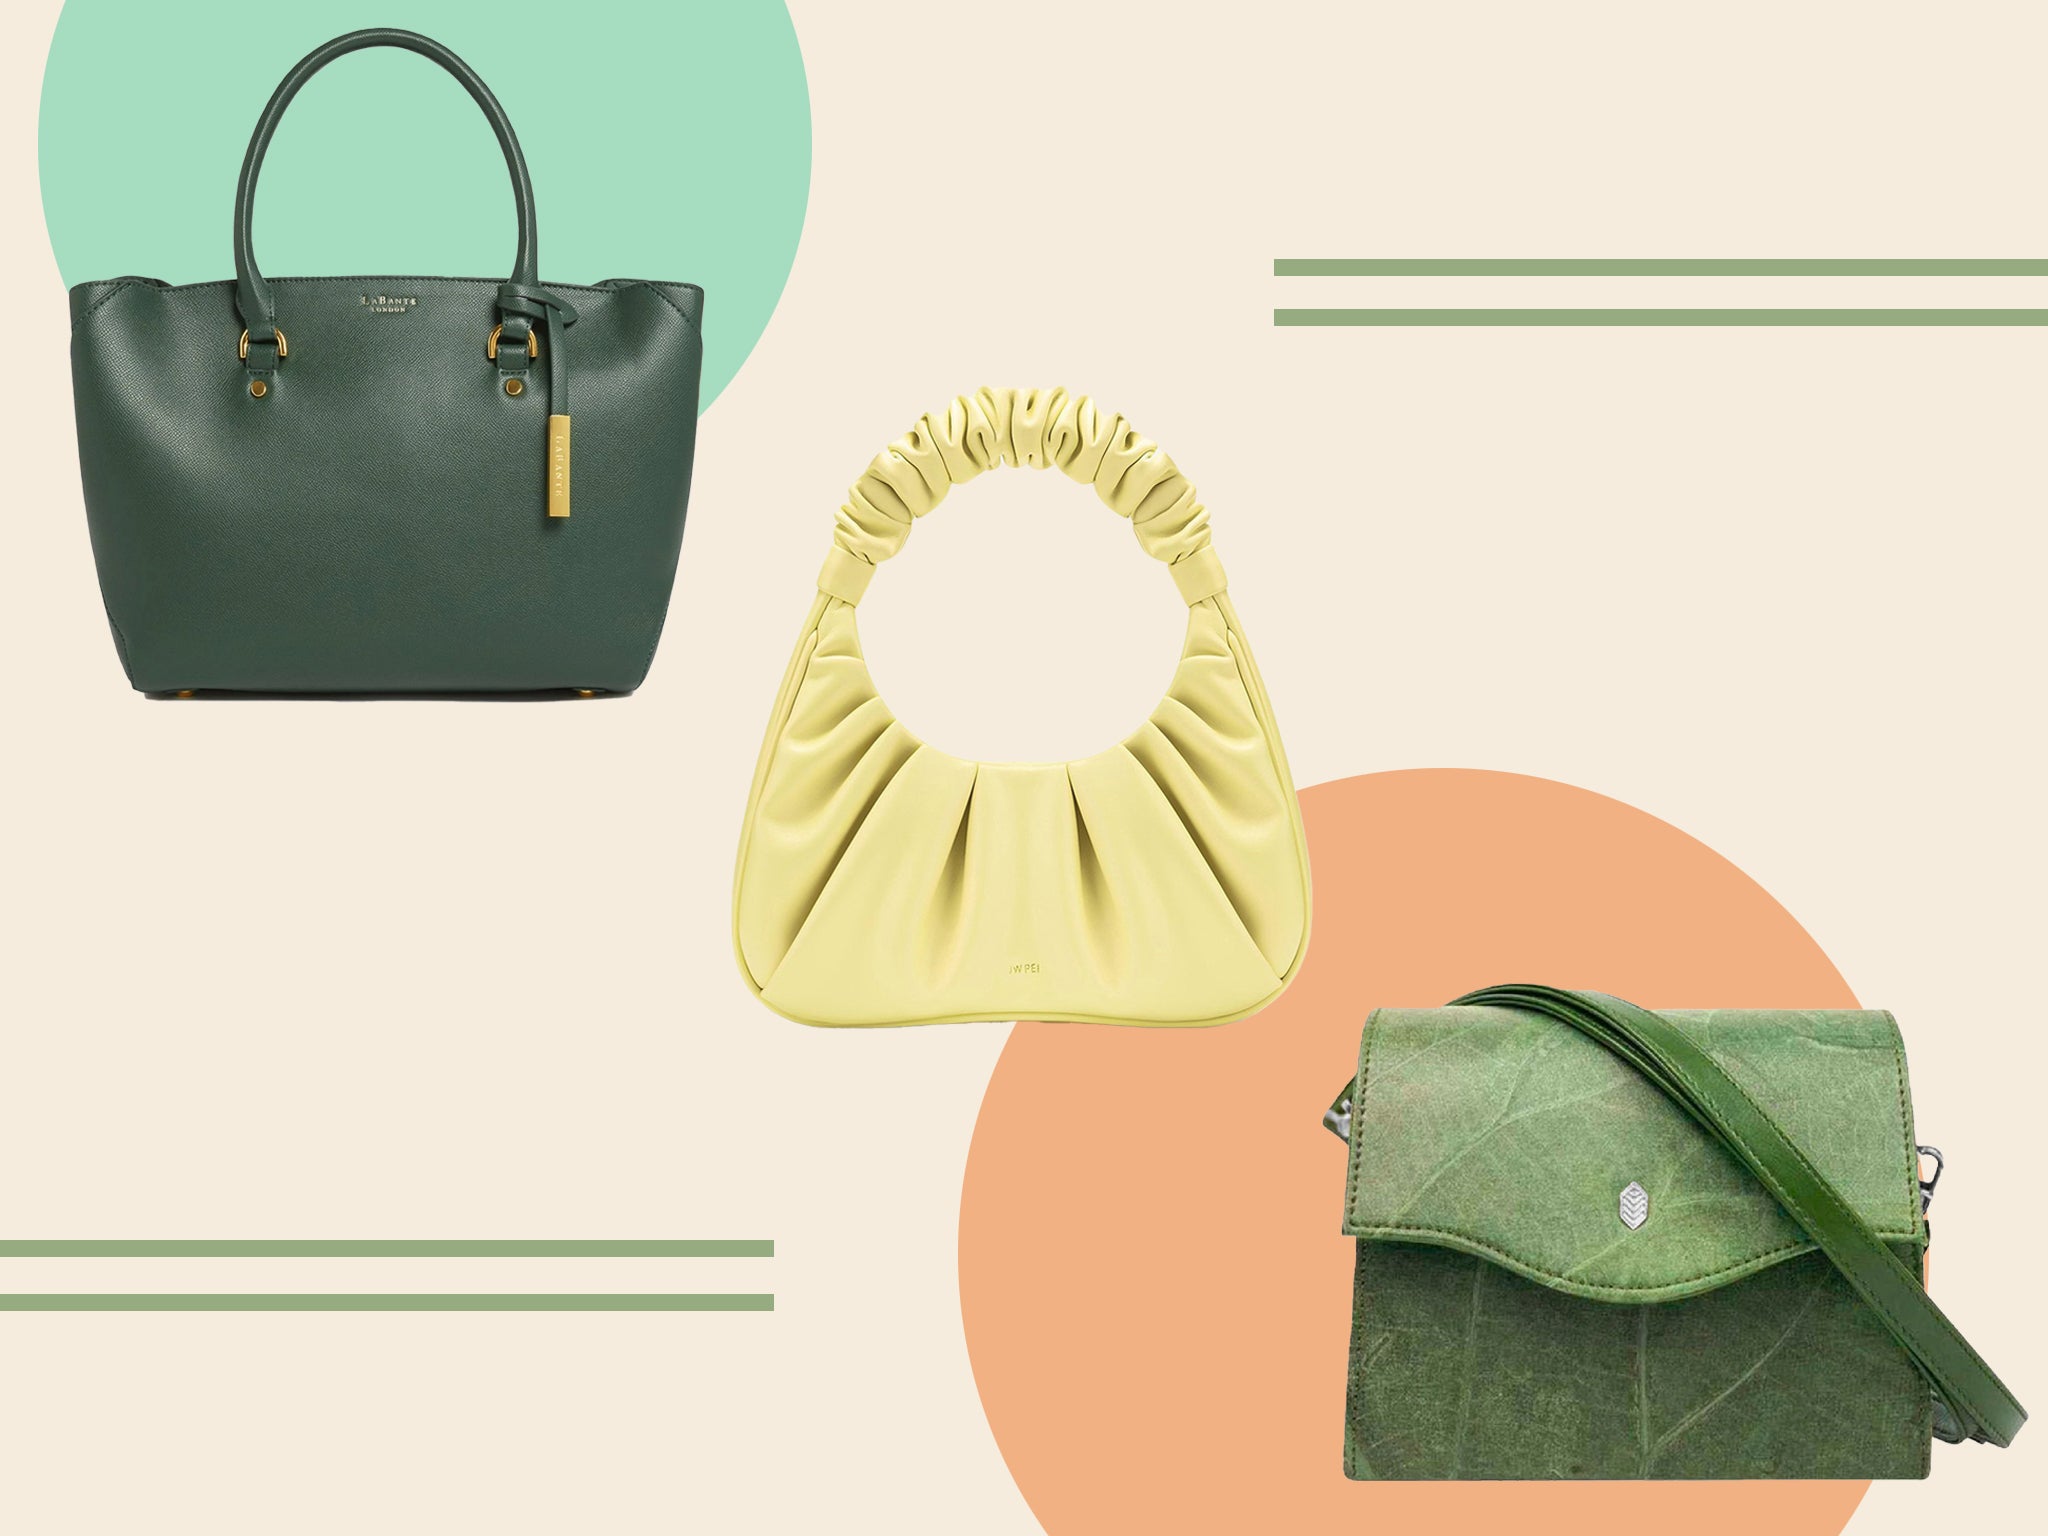 INNOVATIVE CRAFT, TRENDS THAT MAKE SILK BAGS BECOME MORE THAN CRAFTWORKS